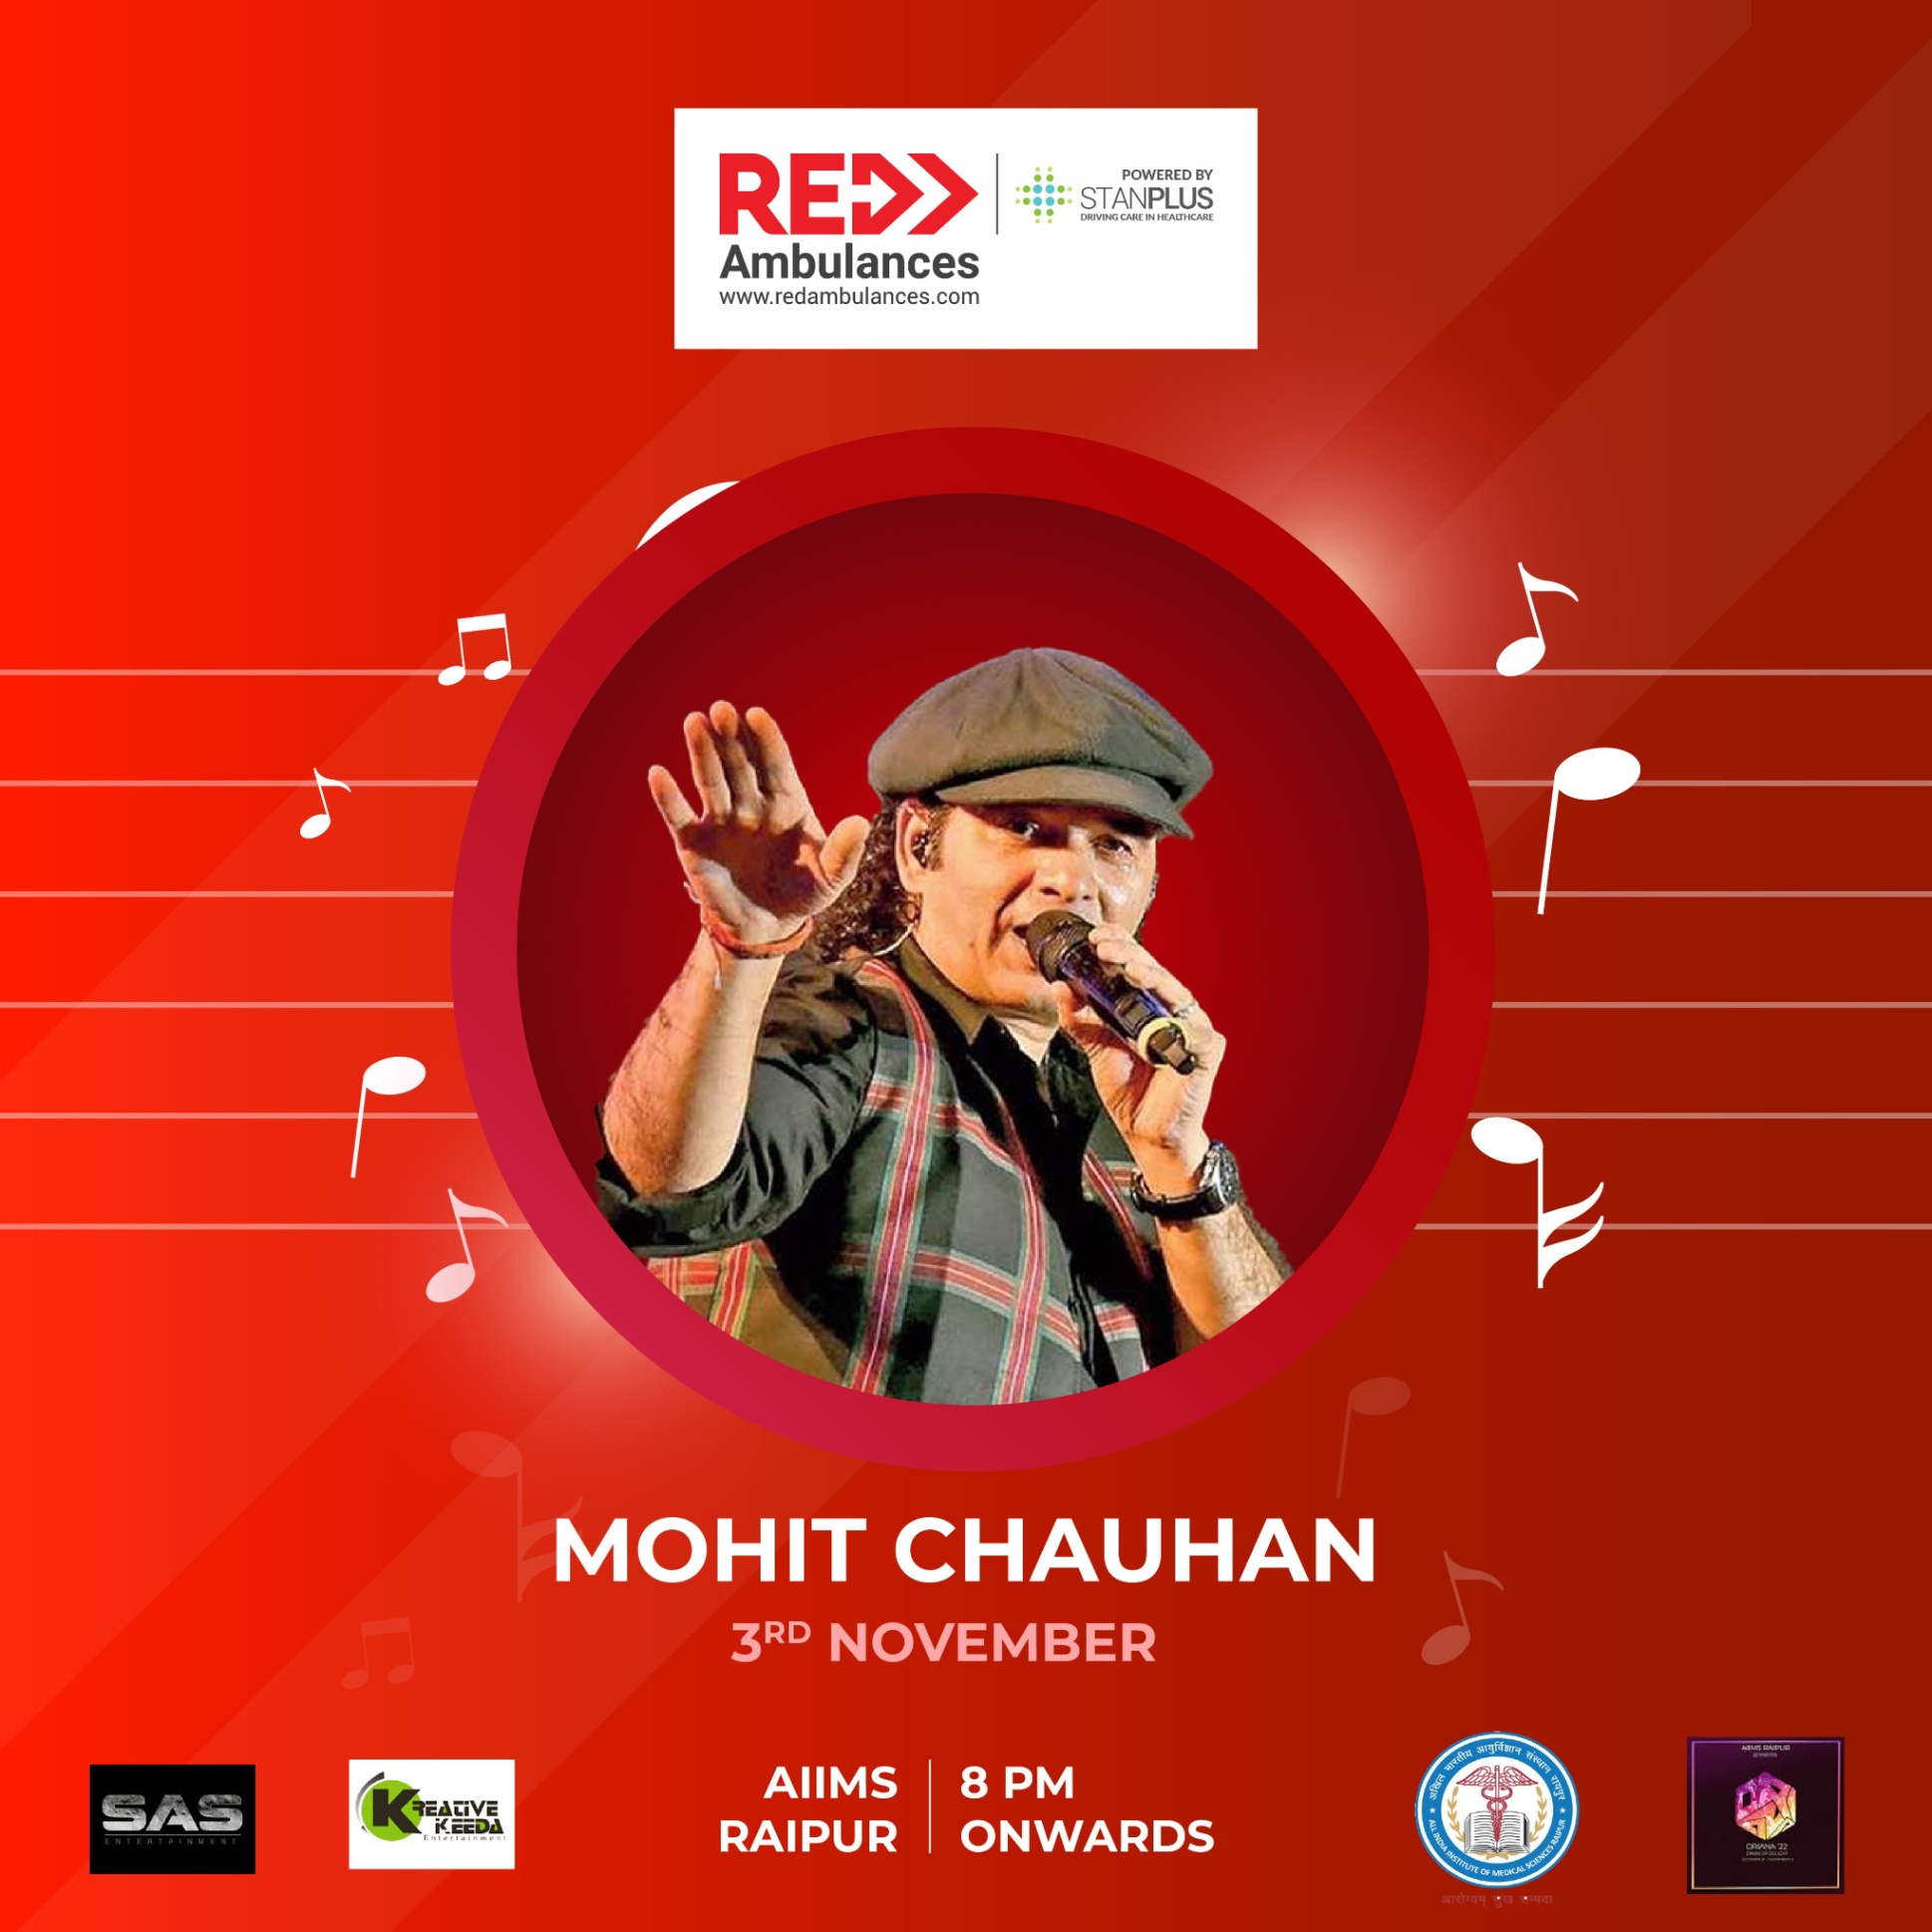 Legendary artist @_MohitChauhan will be performing at AIIMS Raipur Oriana Festival, a performance sponsored by Red Ambulances. Catch the singer live on the 3rd of November.
#Concert #Artist #Event #Music #Live #Stage #Singer #RedAmbulances 